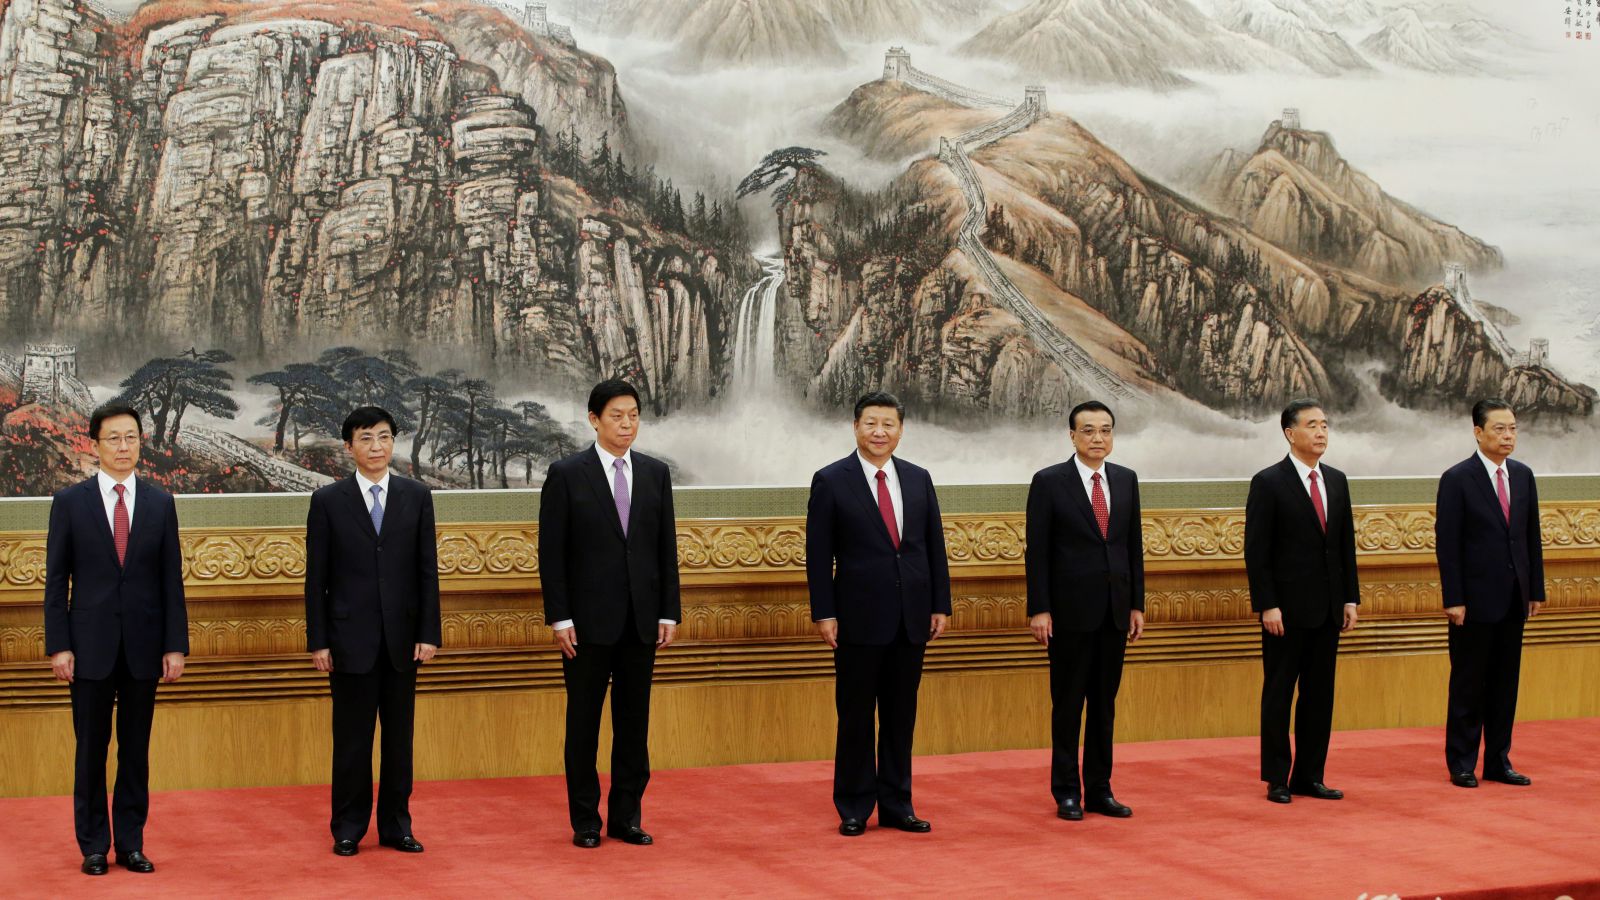 China Panics the World But Is President Xi Jinping Grabbing Powers for Himself Or the System?